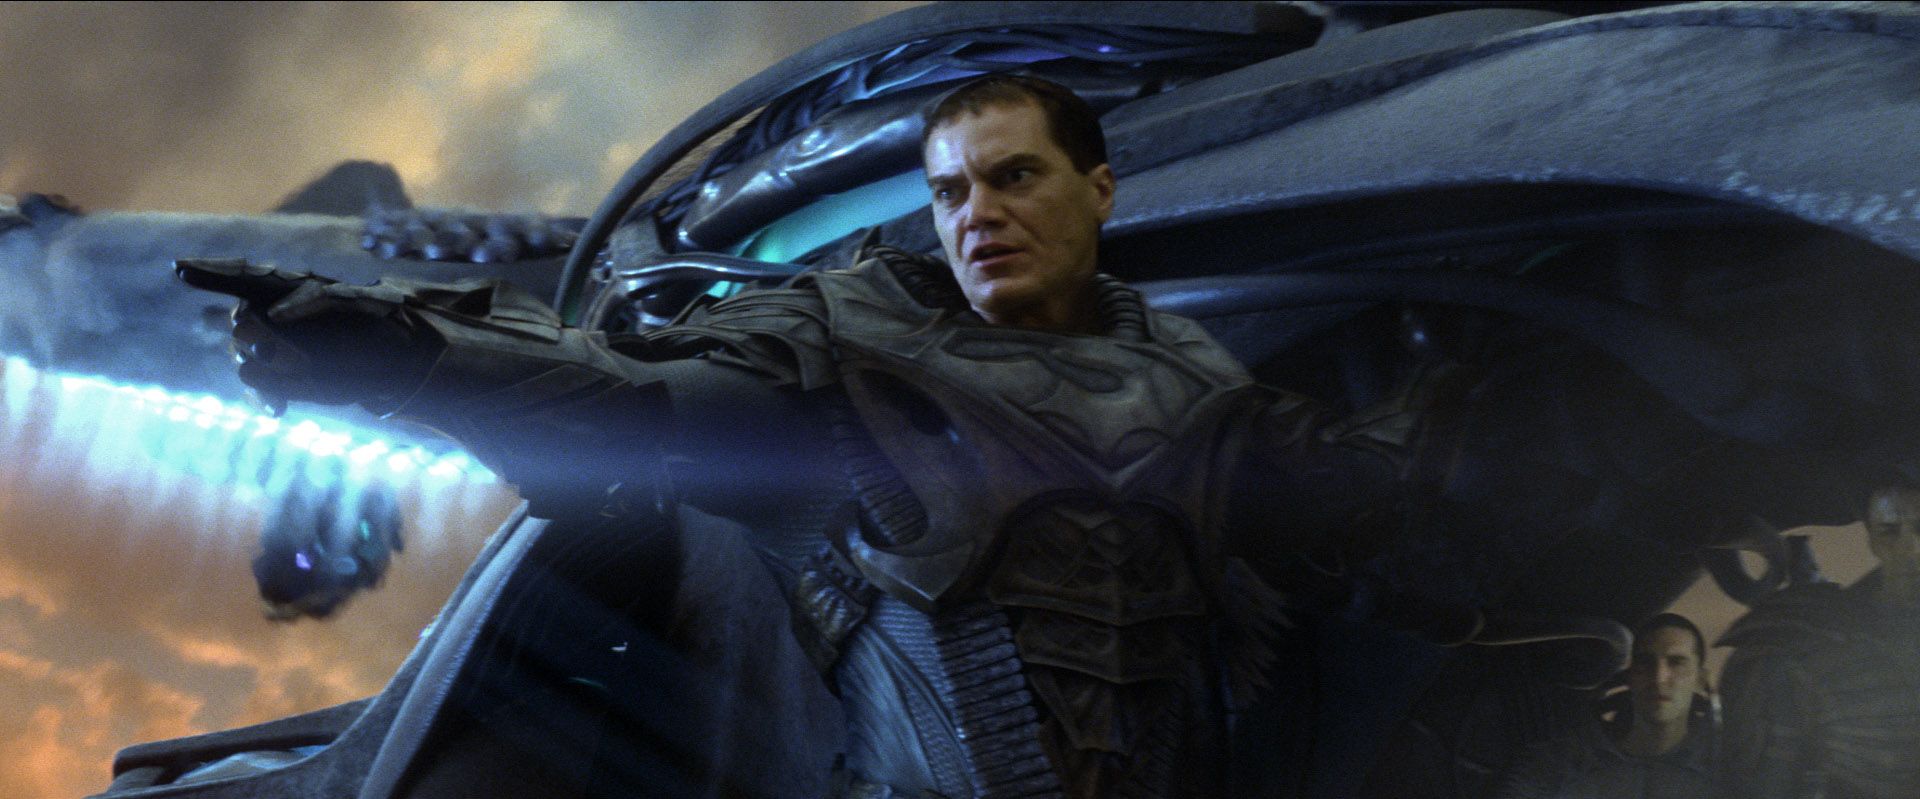 General Zod screenshots, image and picture